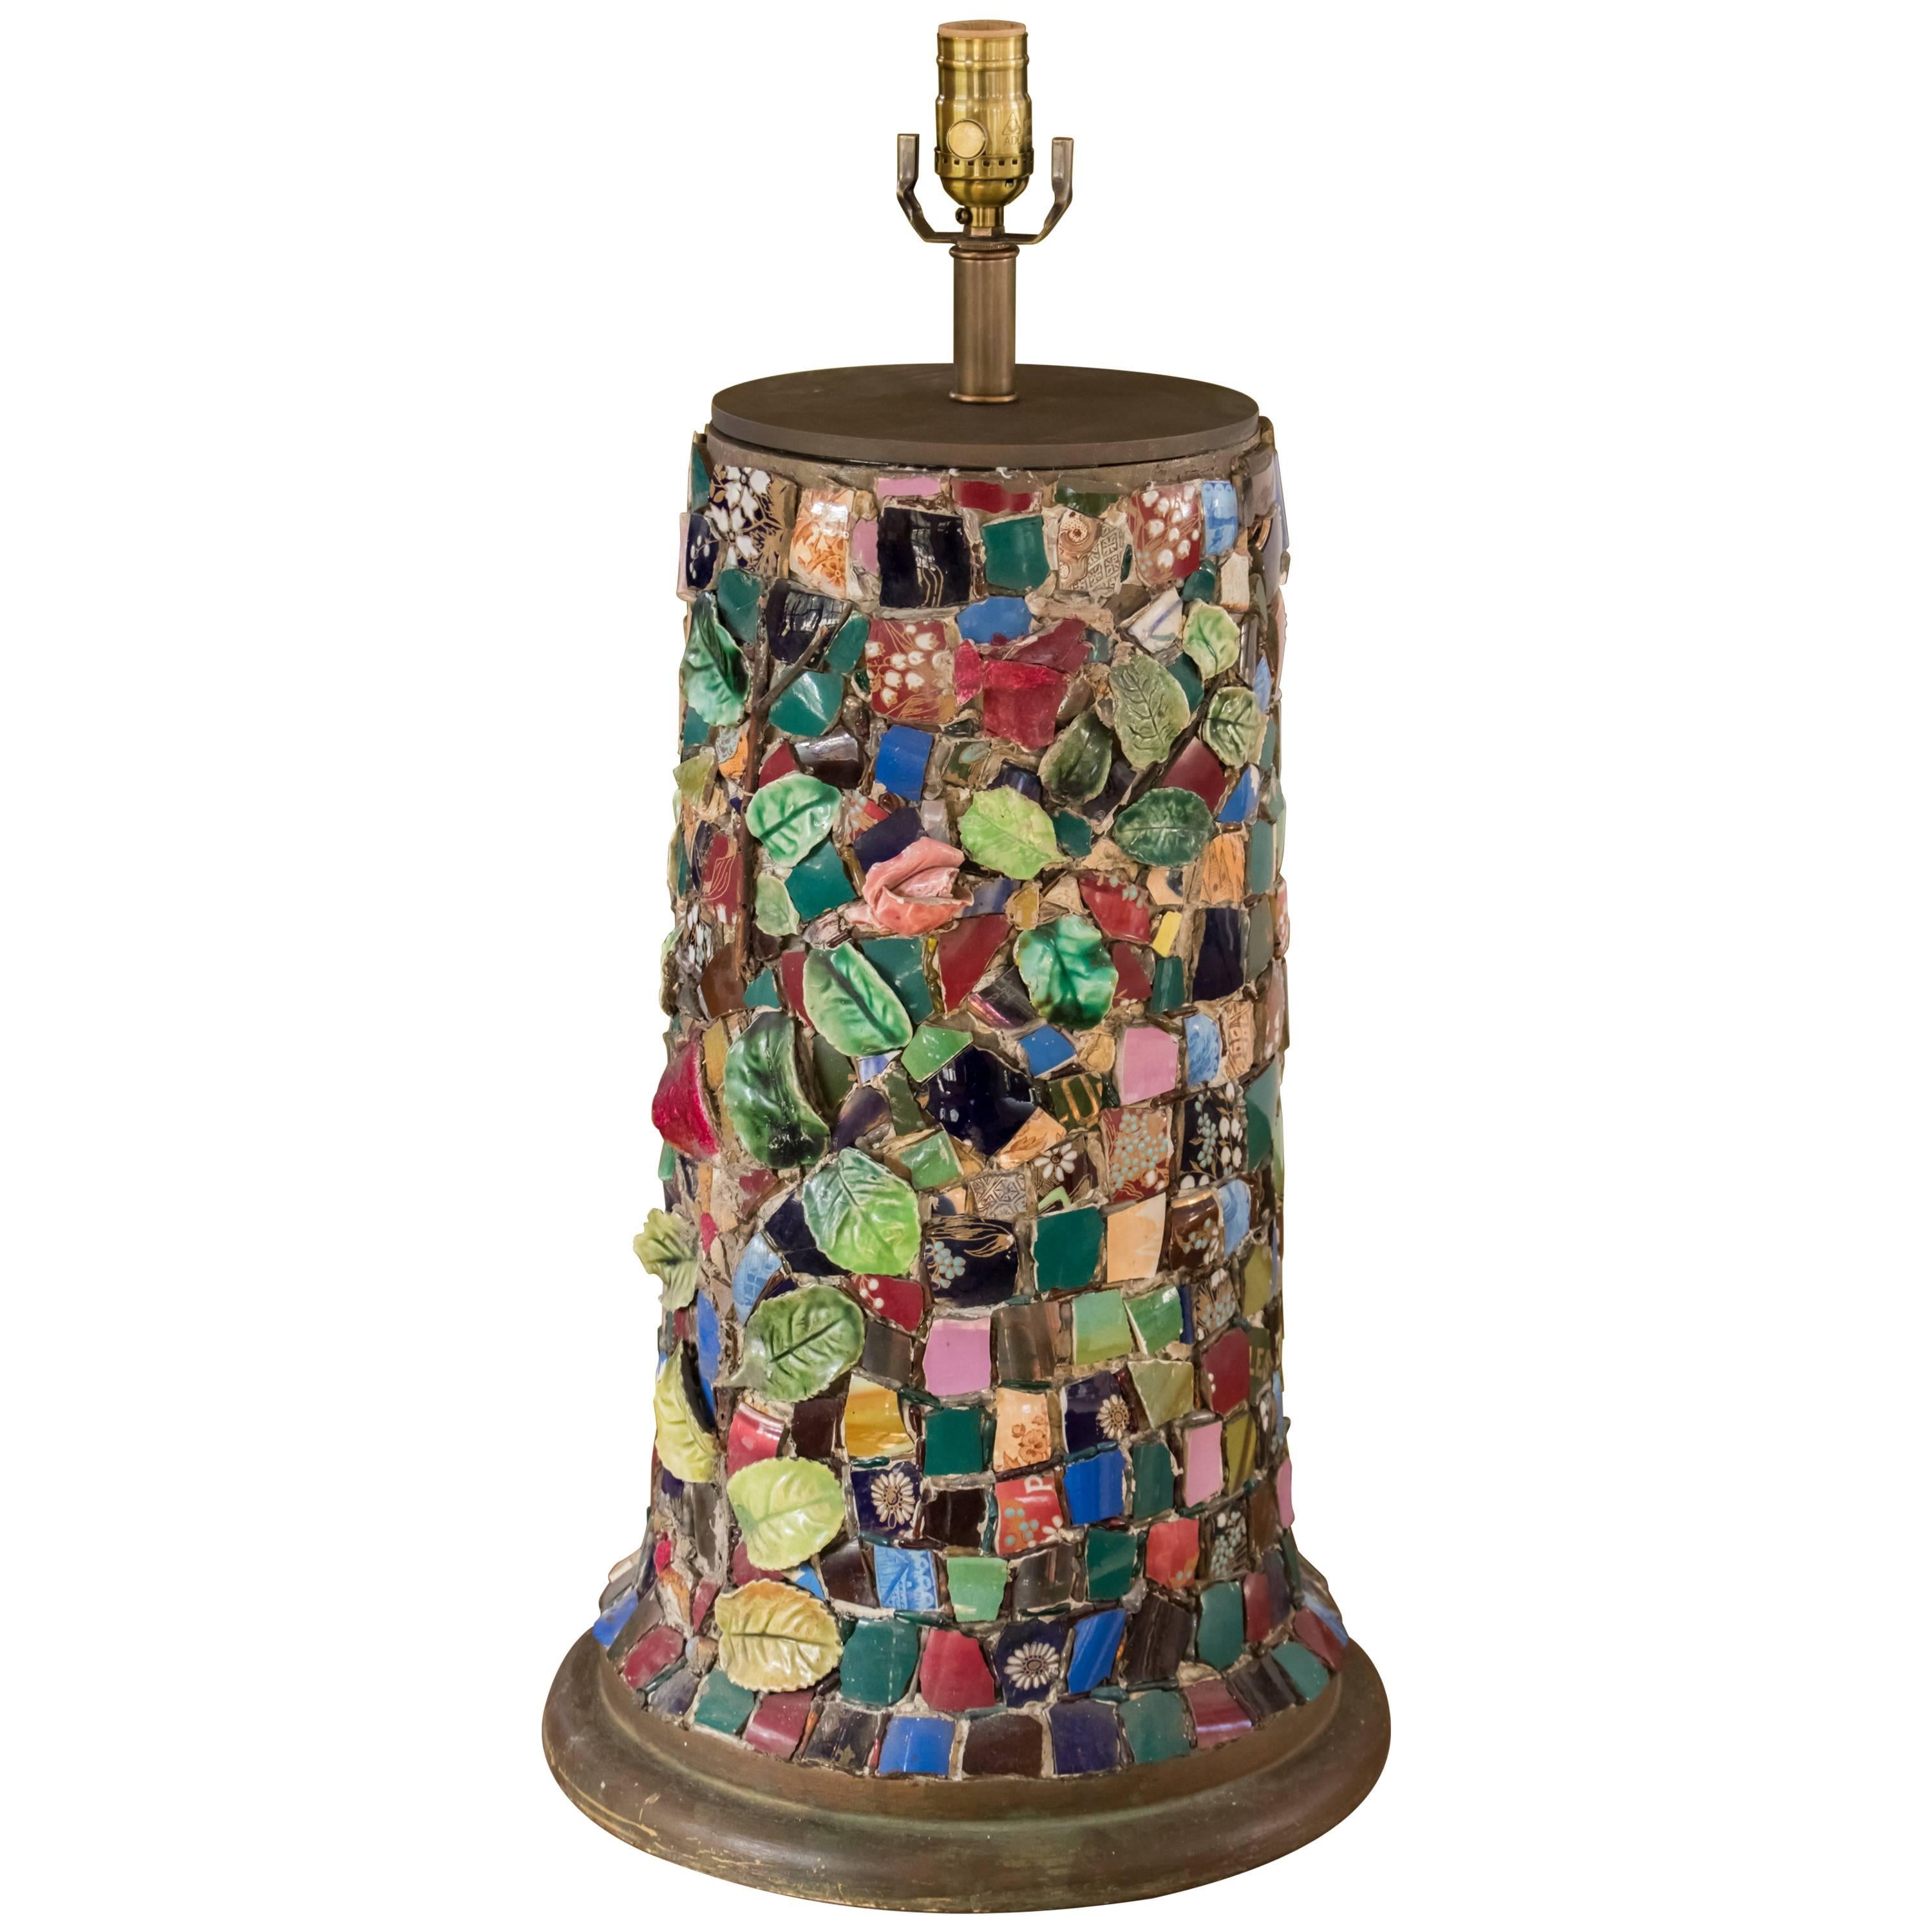 One of a Kind, Handmade French Pique Assiette Mosaic Table Lamp, circa 1930s